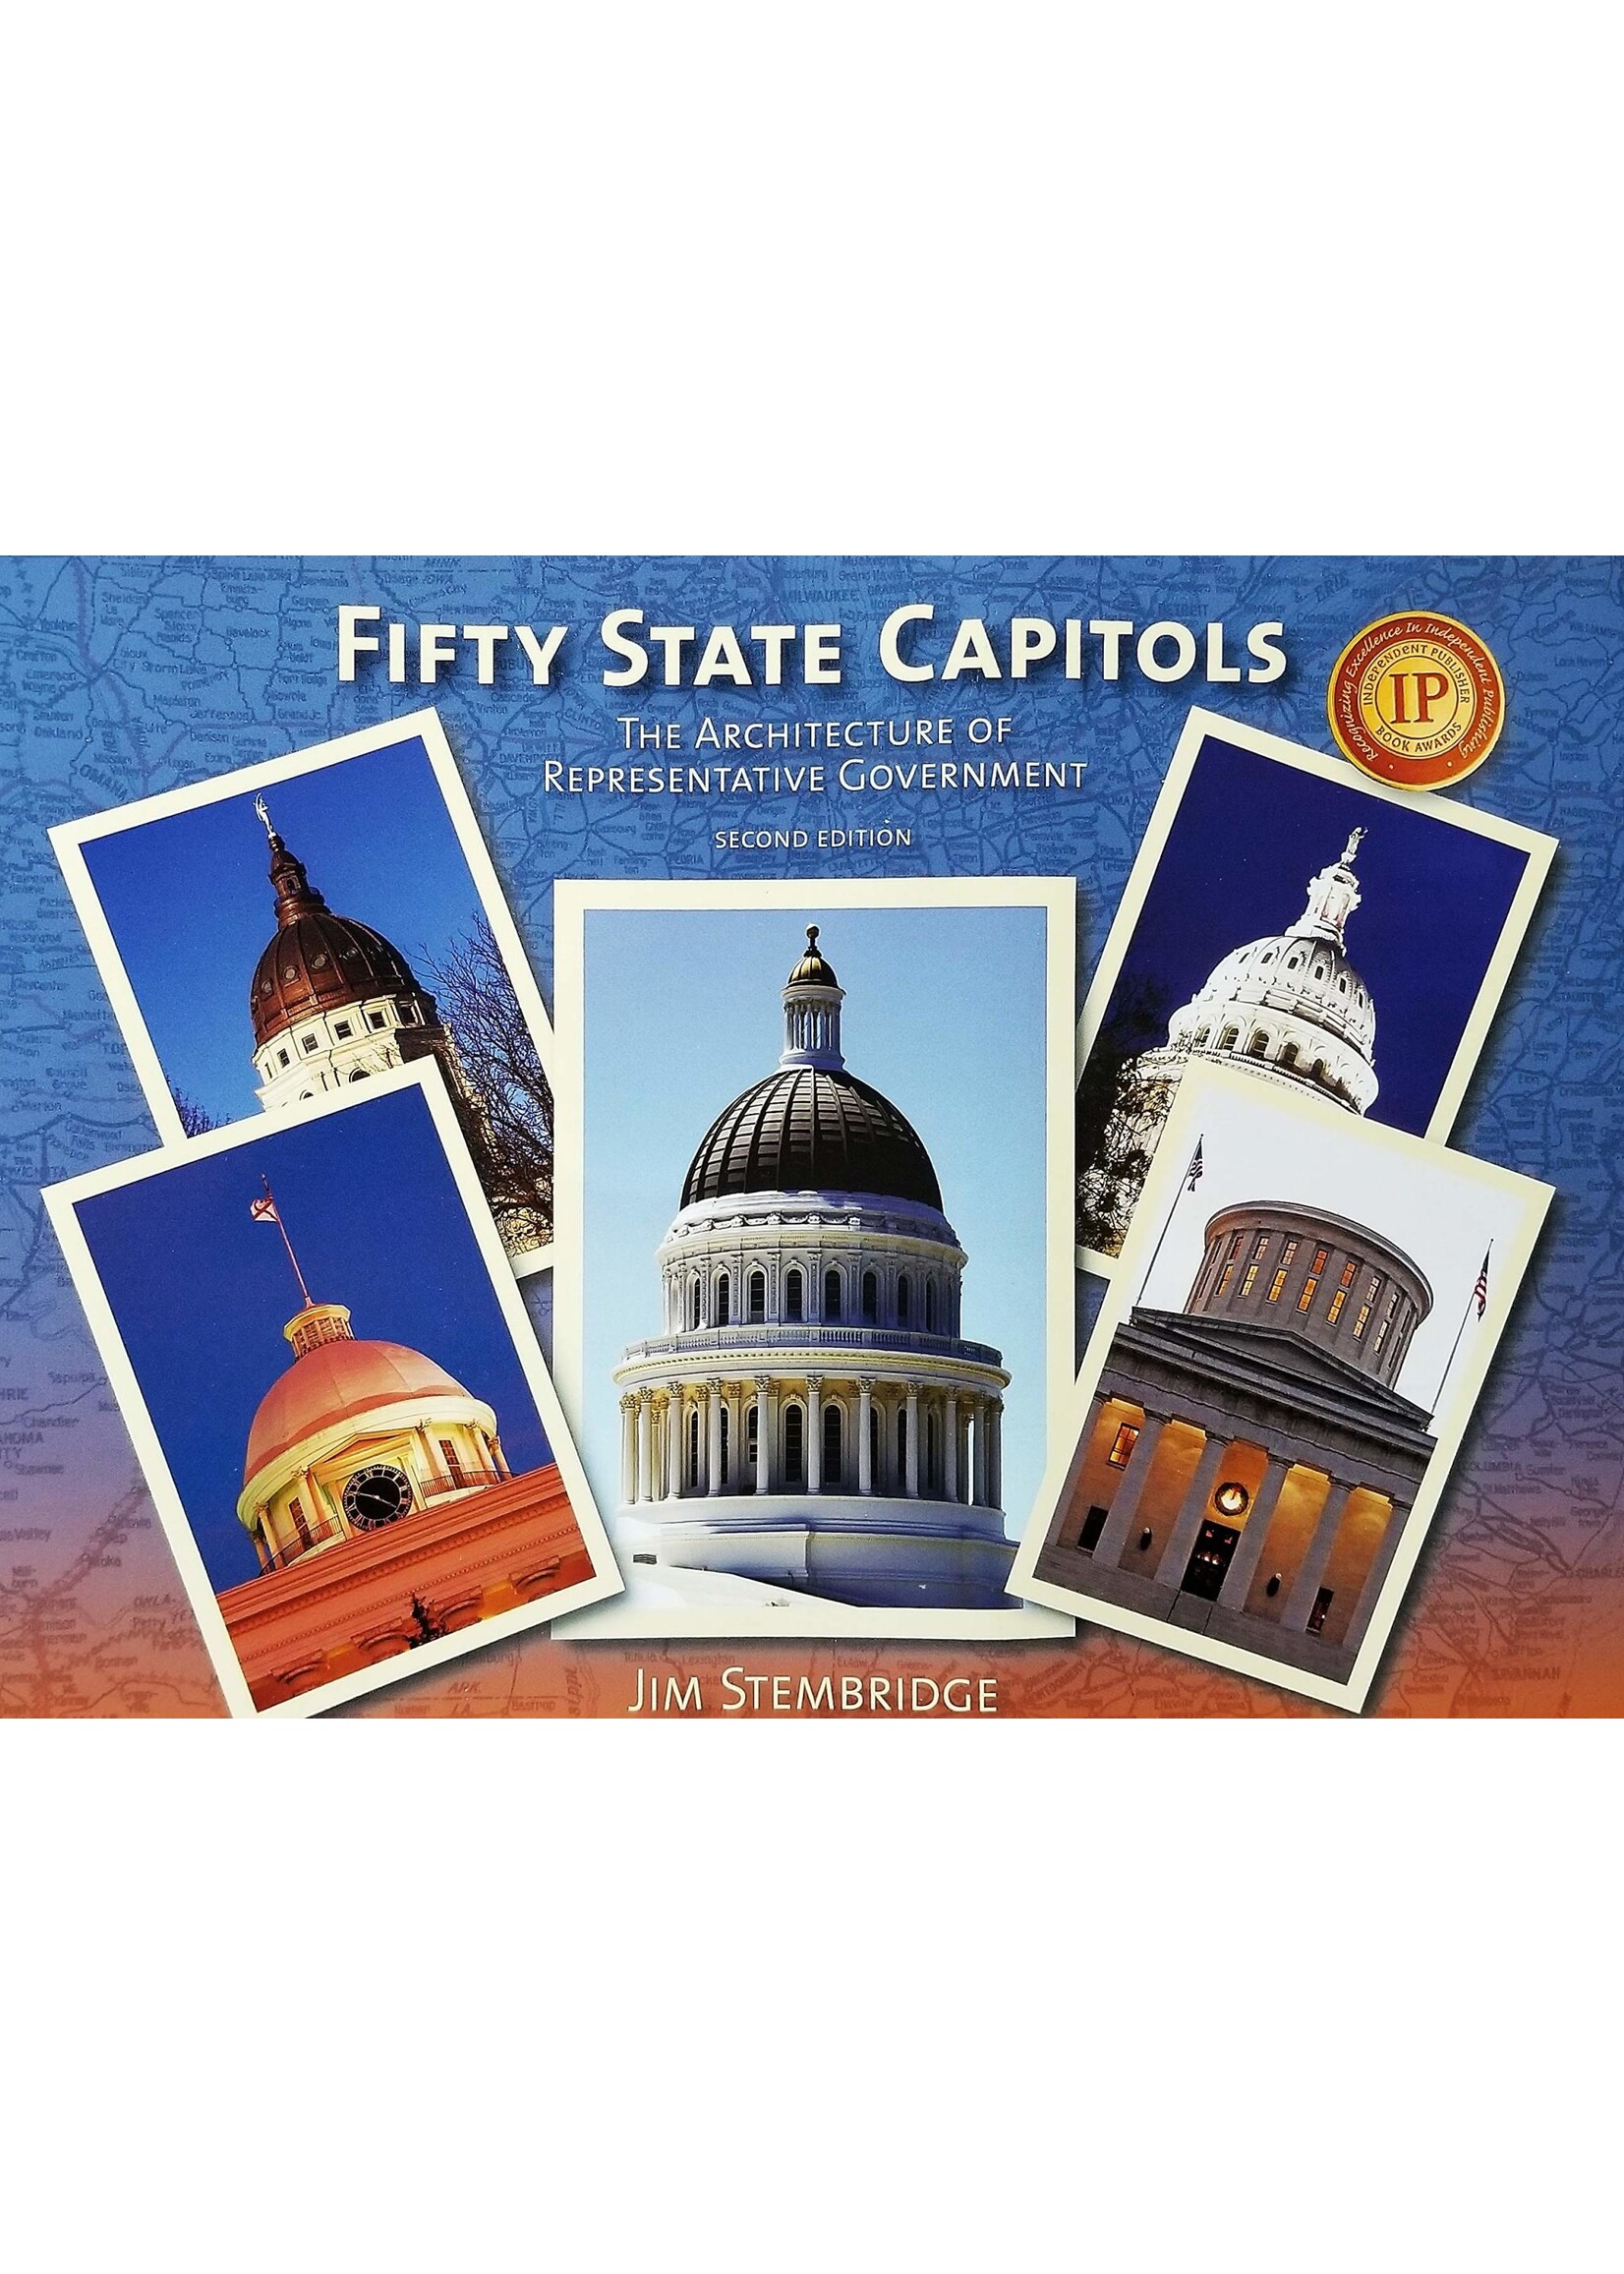 Fifty State Capitols: The Architecture of Representative Government 2nd Edition